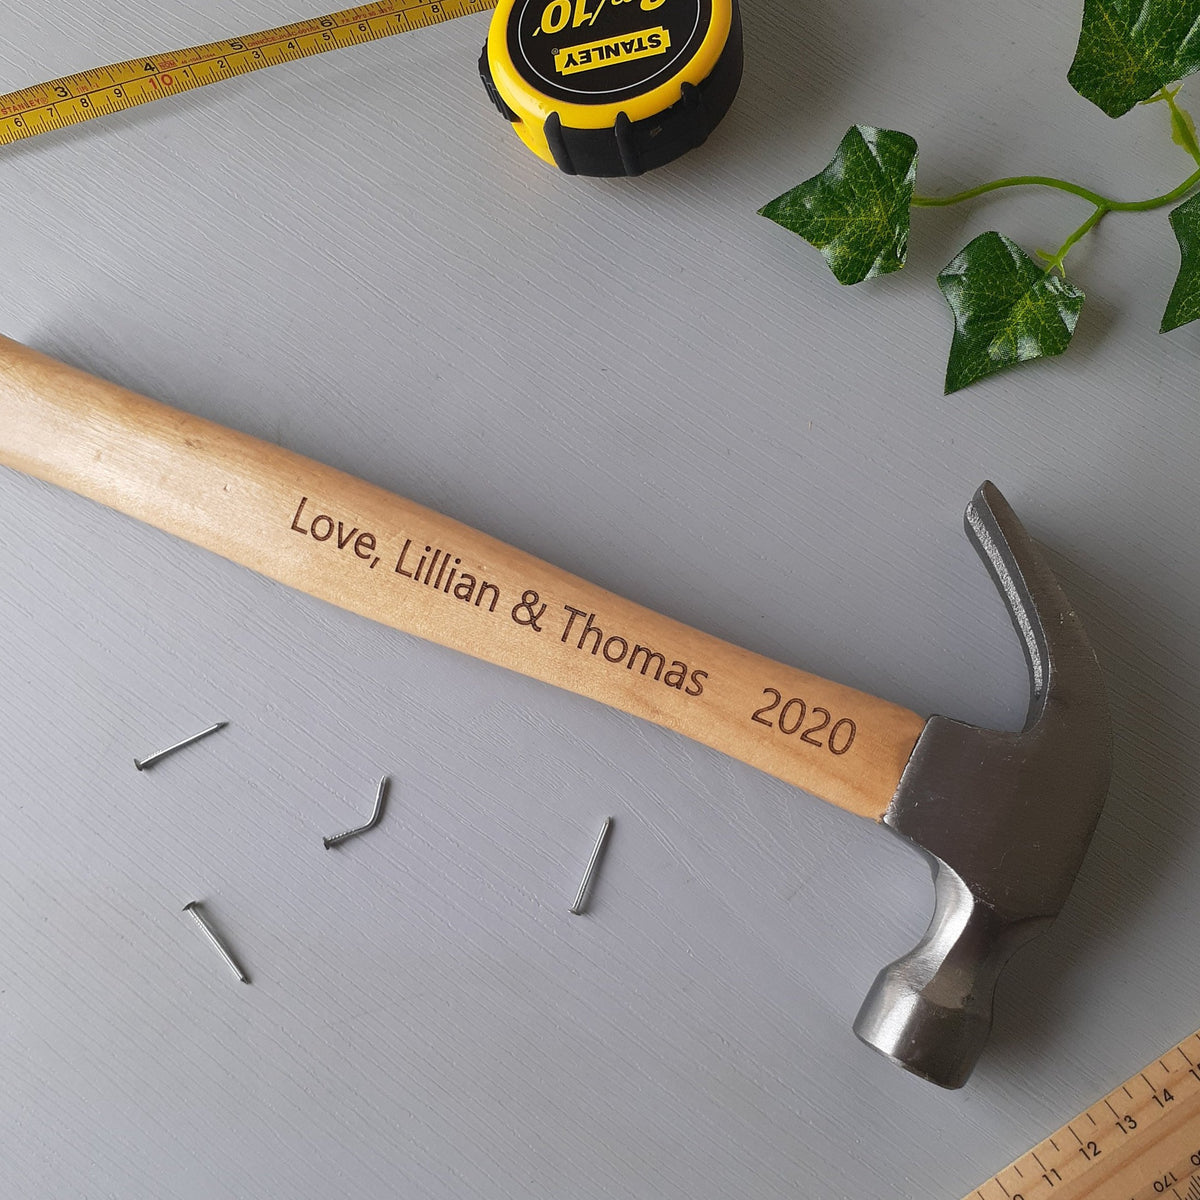 Personalized Engraving only (does not include hammer)